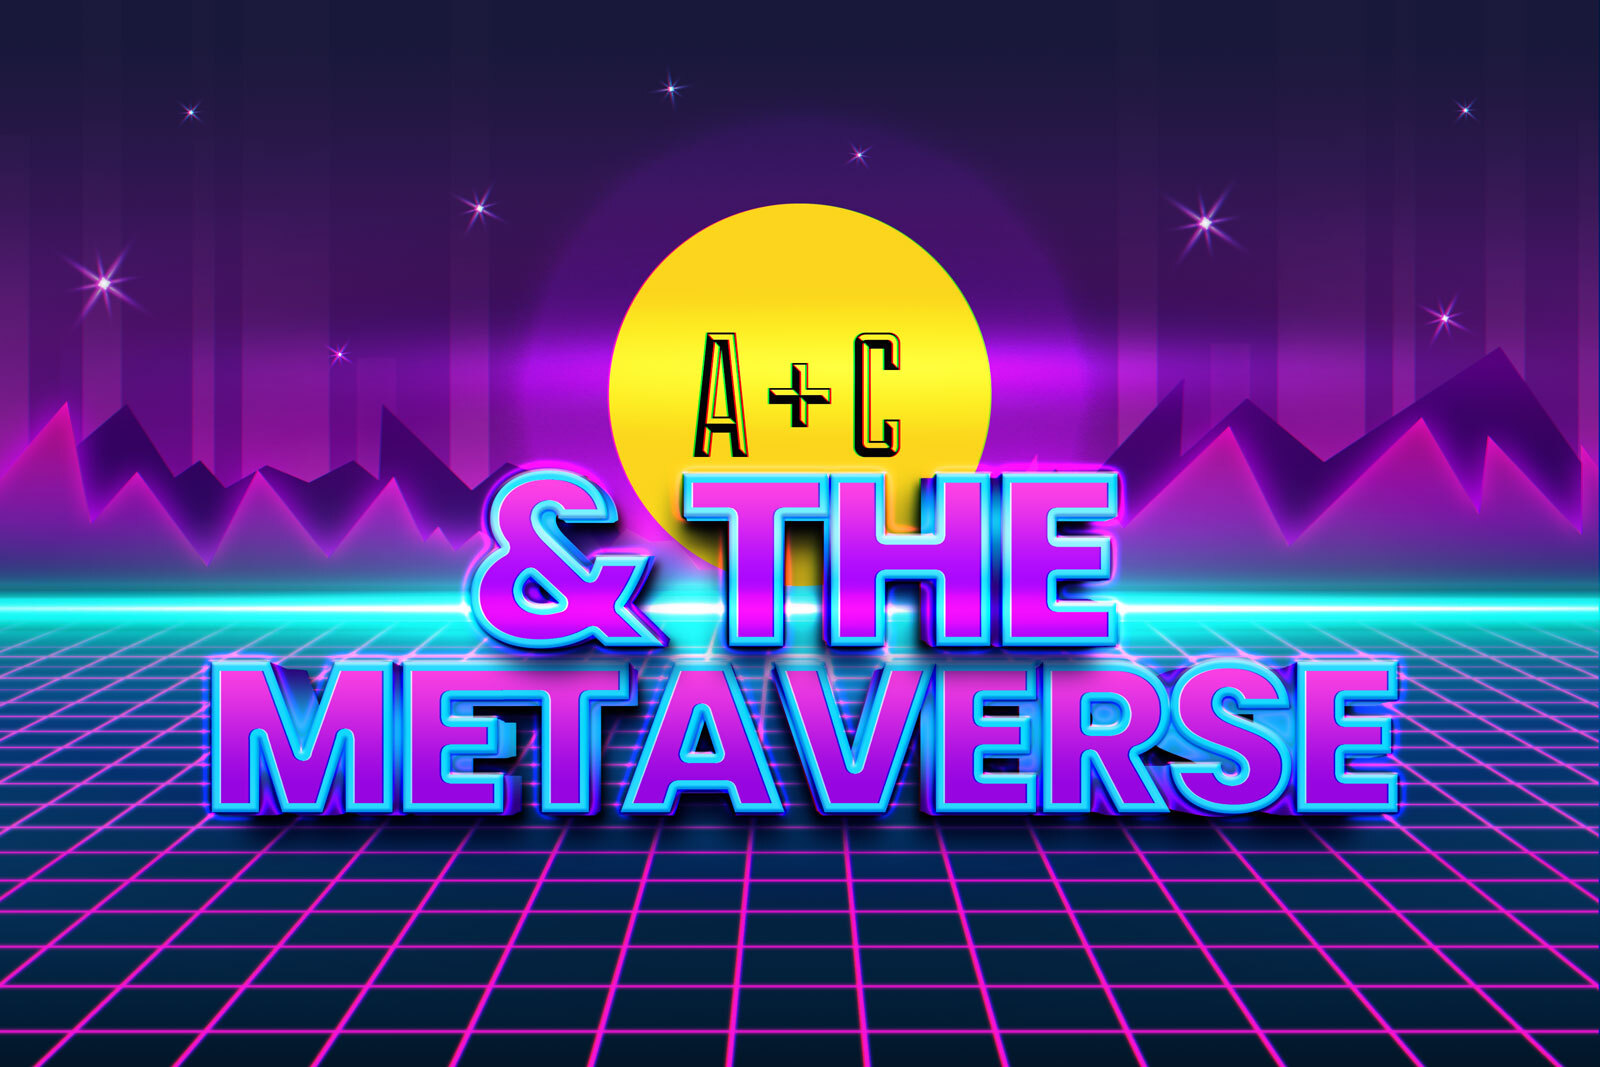 Animation and The Metaverse